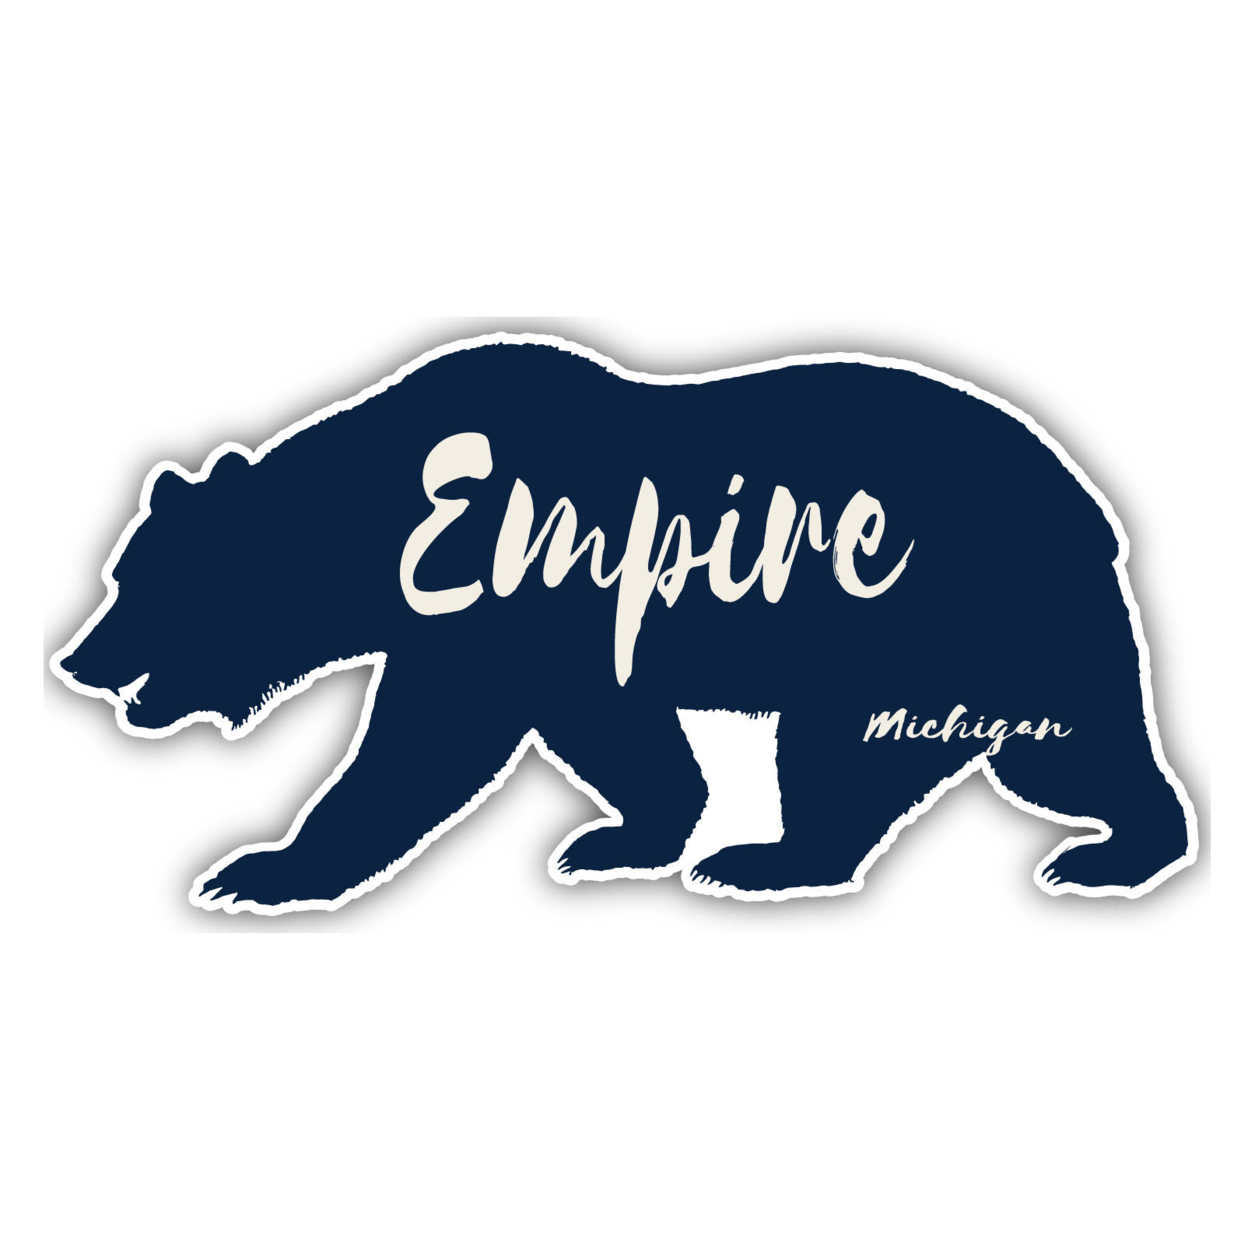 Empire Michigan Souvenir Decorative Stickers (Choose Theme And Size) - 4-Pack, 10-Inch, Bear